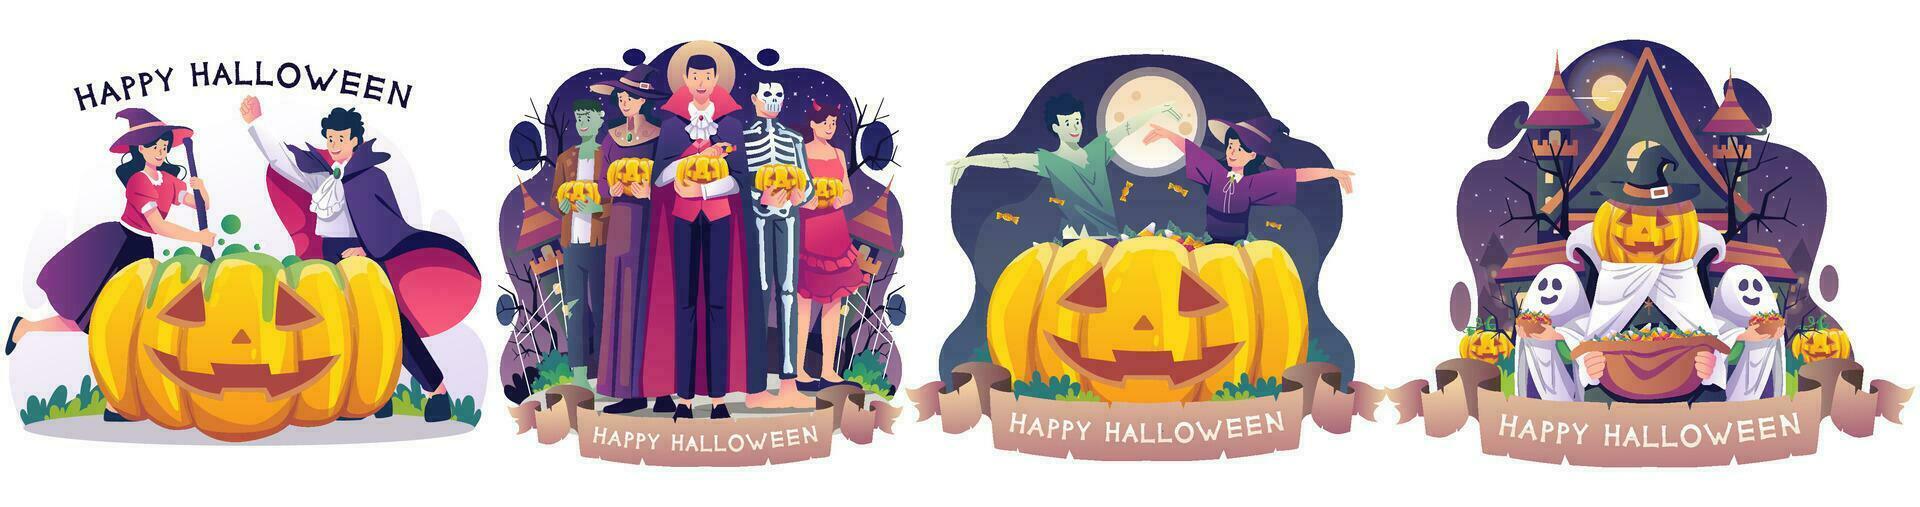 Set of Halloween concept illustration with People in costumes celebrating Halloween illustration vector